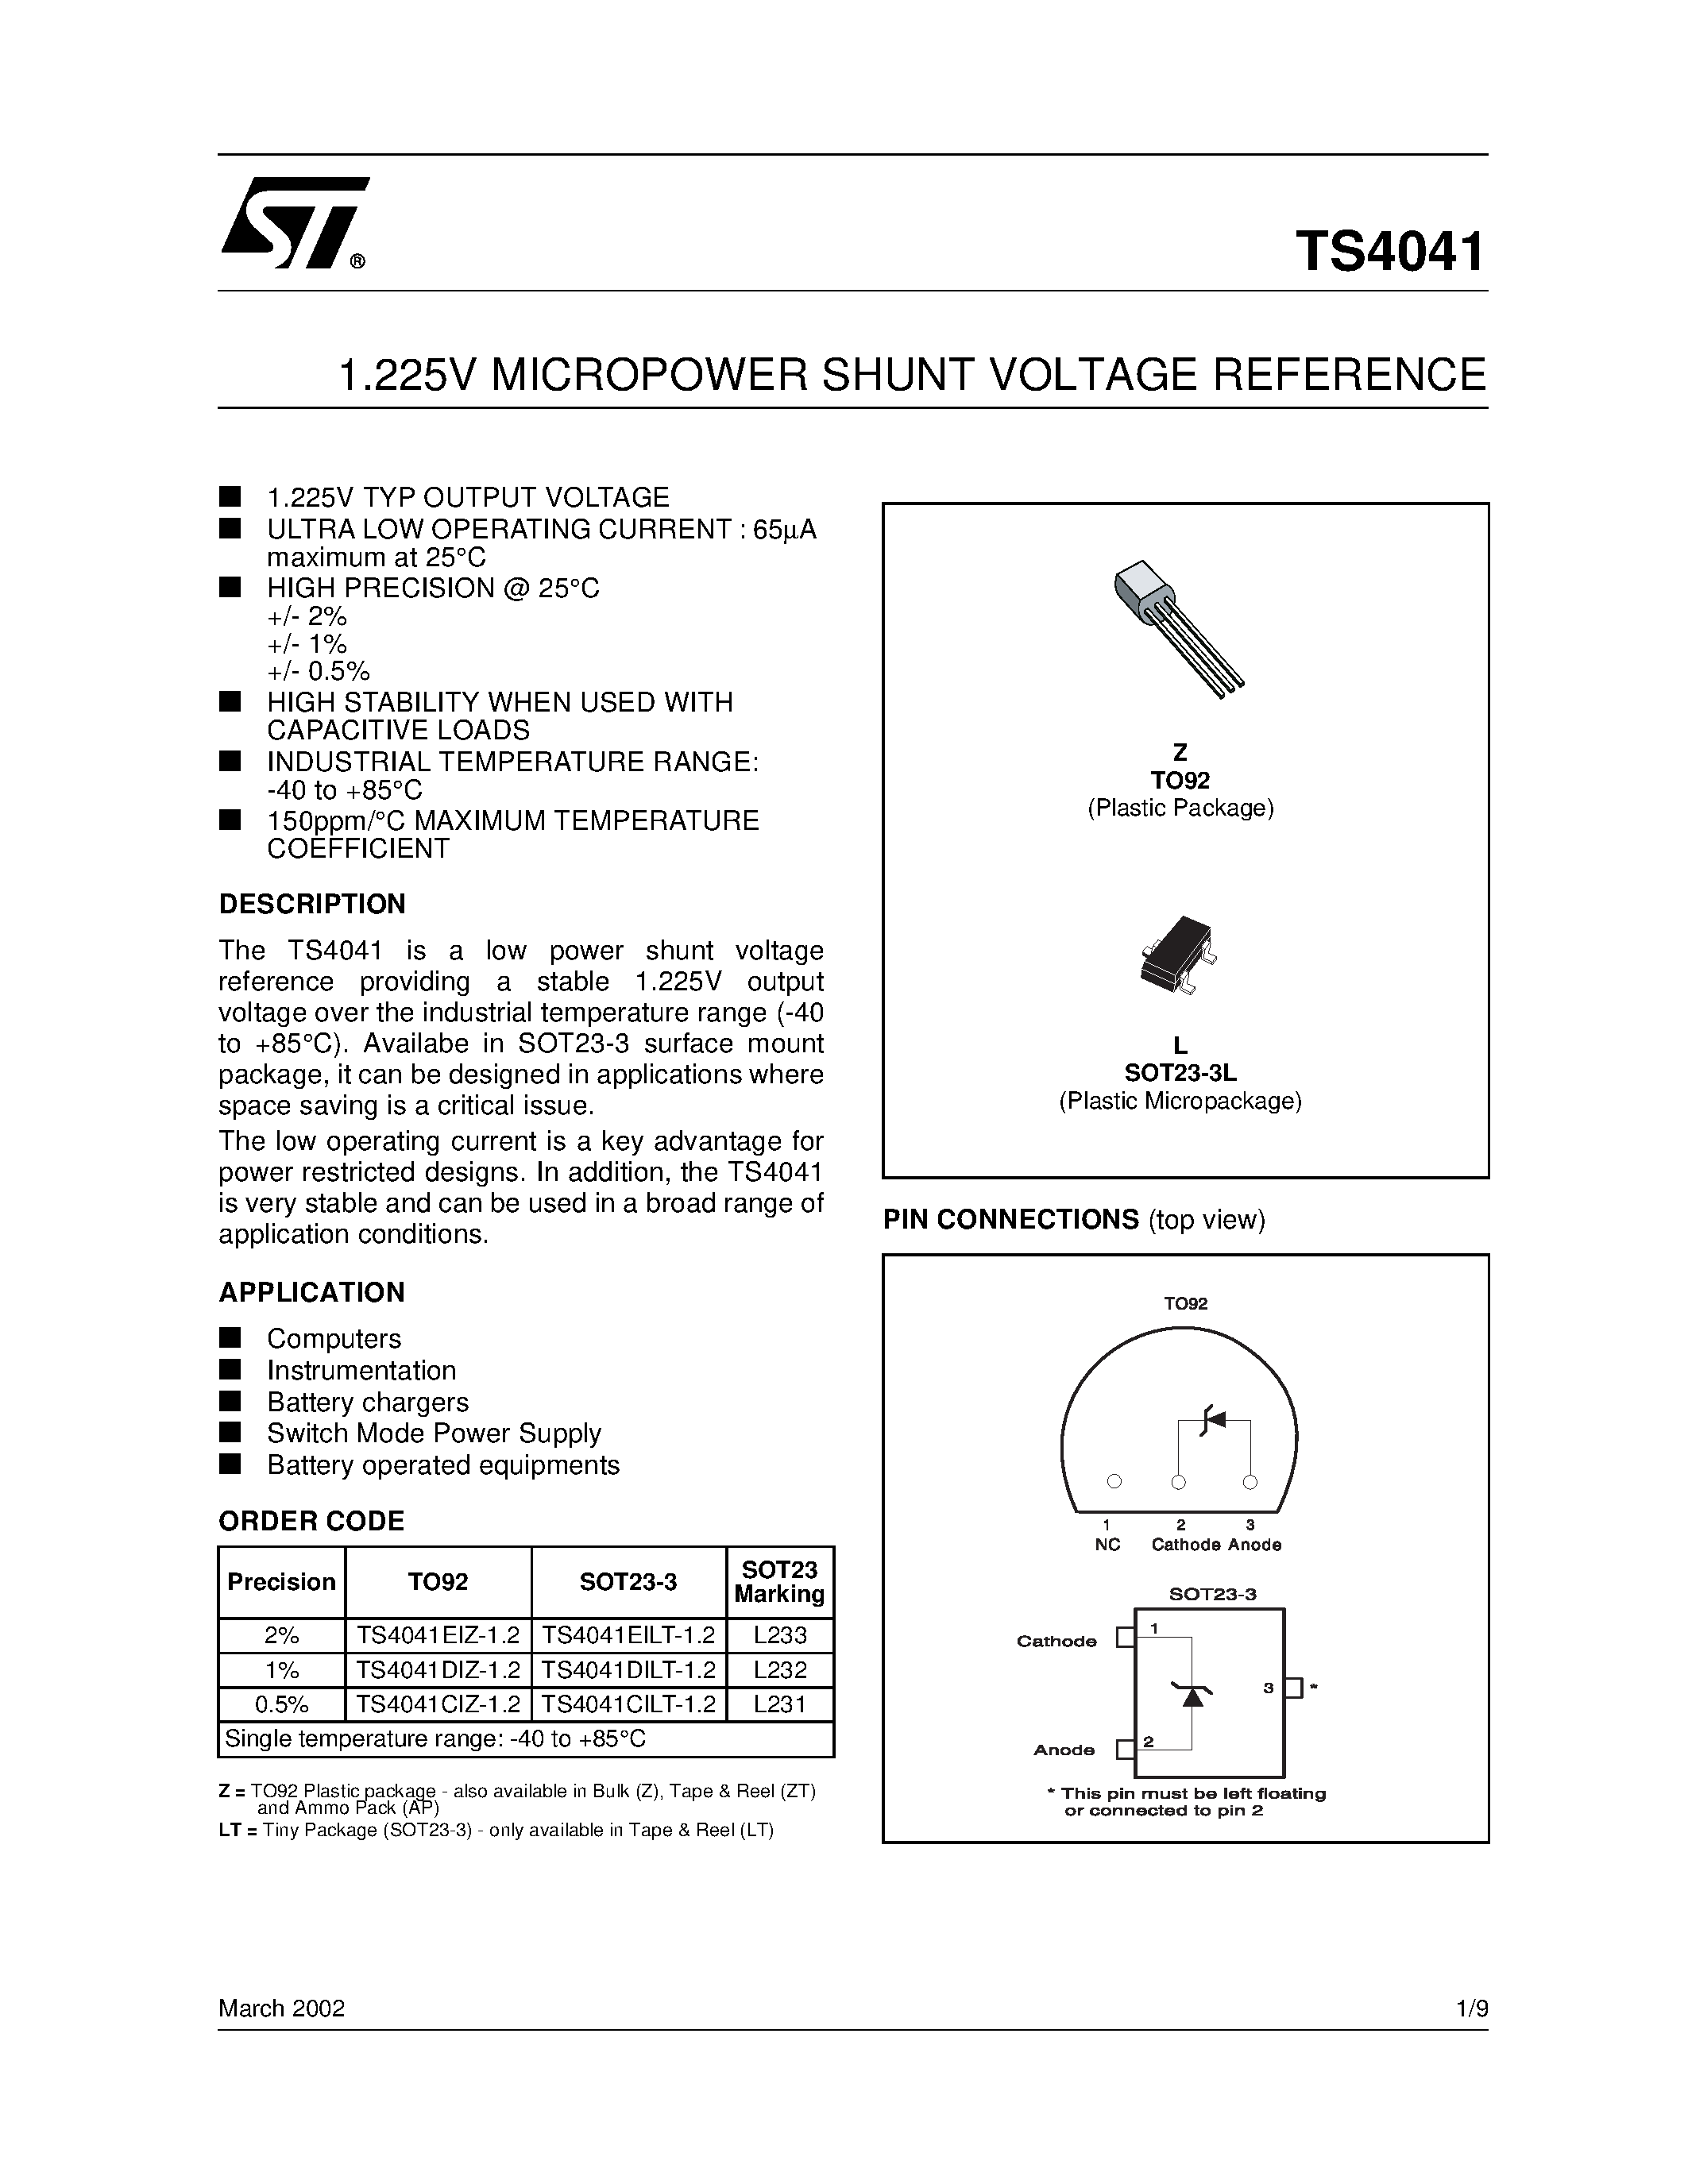 Datasheet TS4041 - 1.225V MICROPOWER SHUNT VOLTAGE REFERENCE page 1